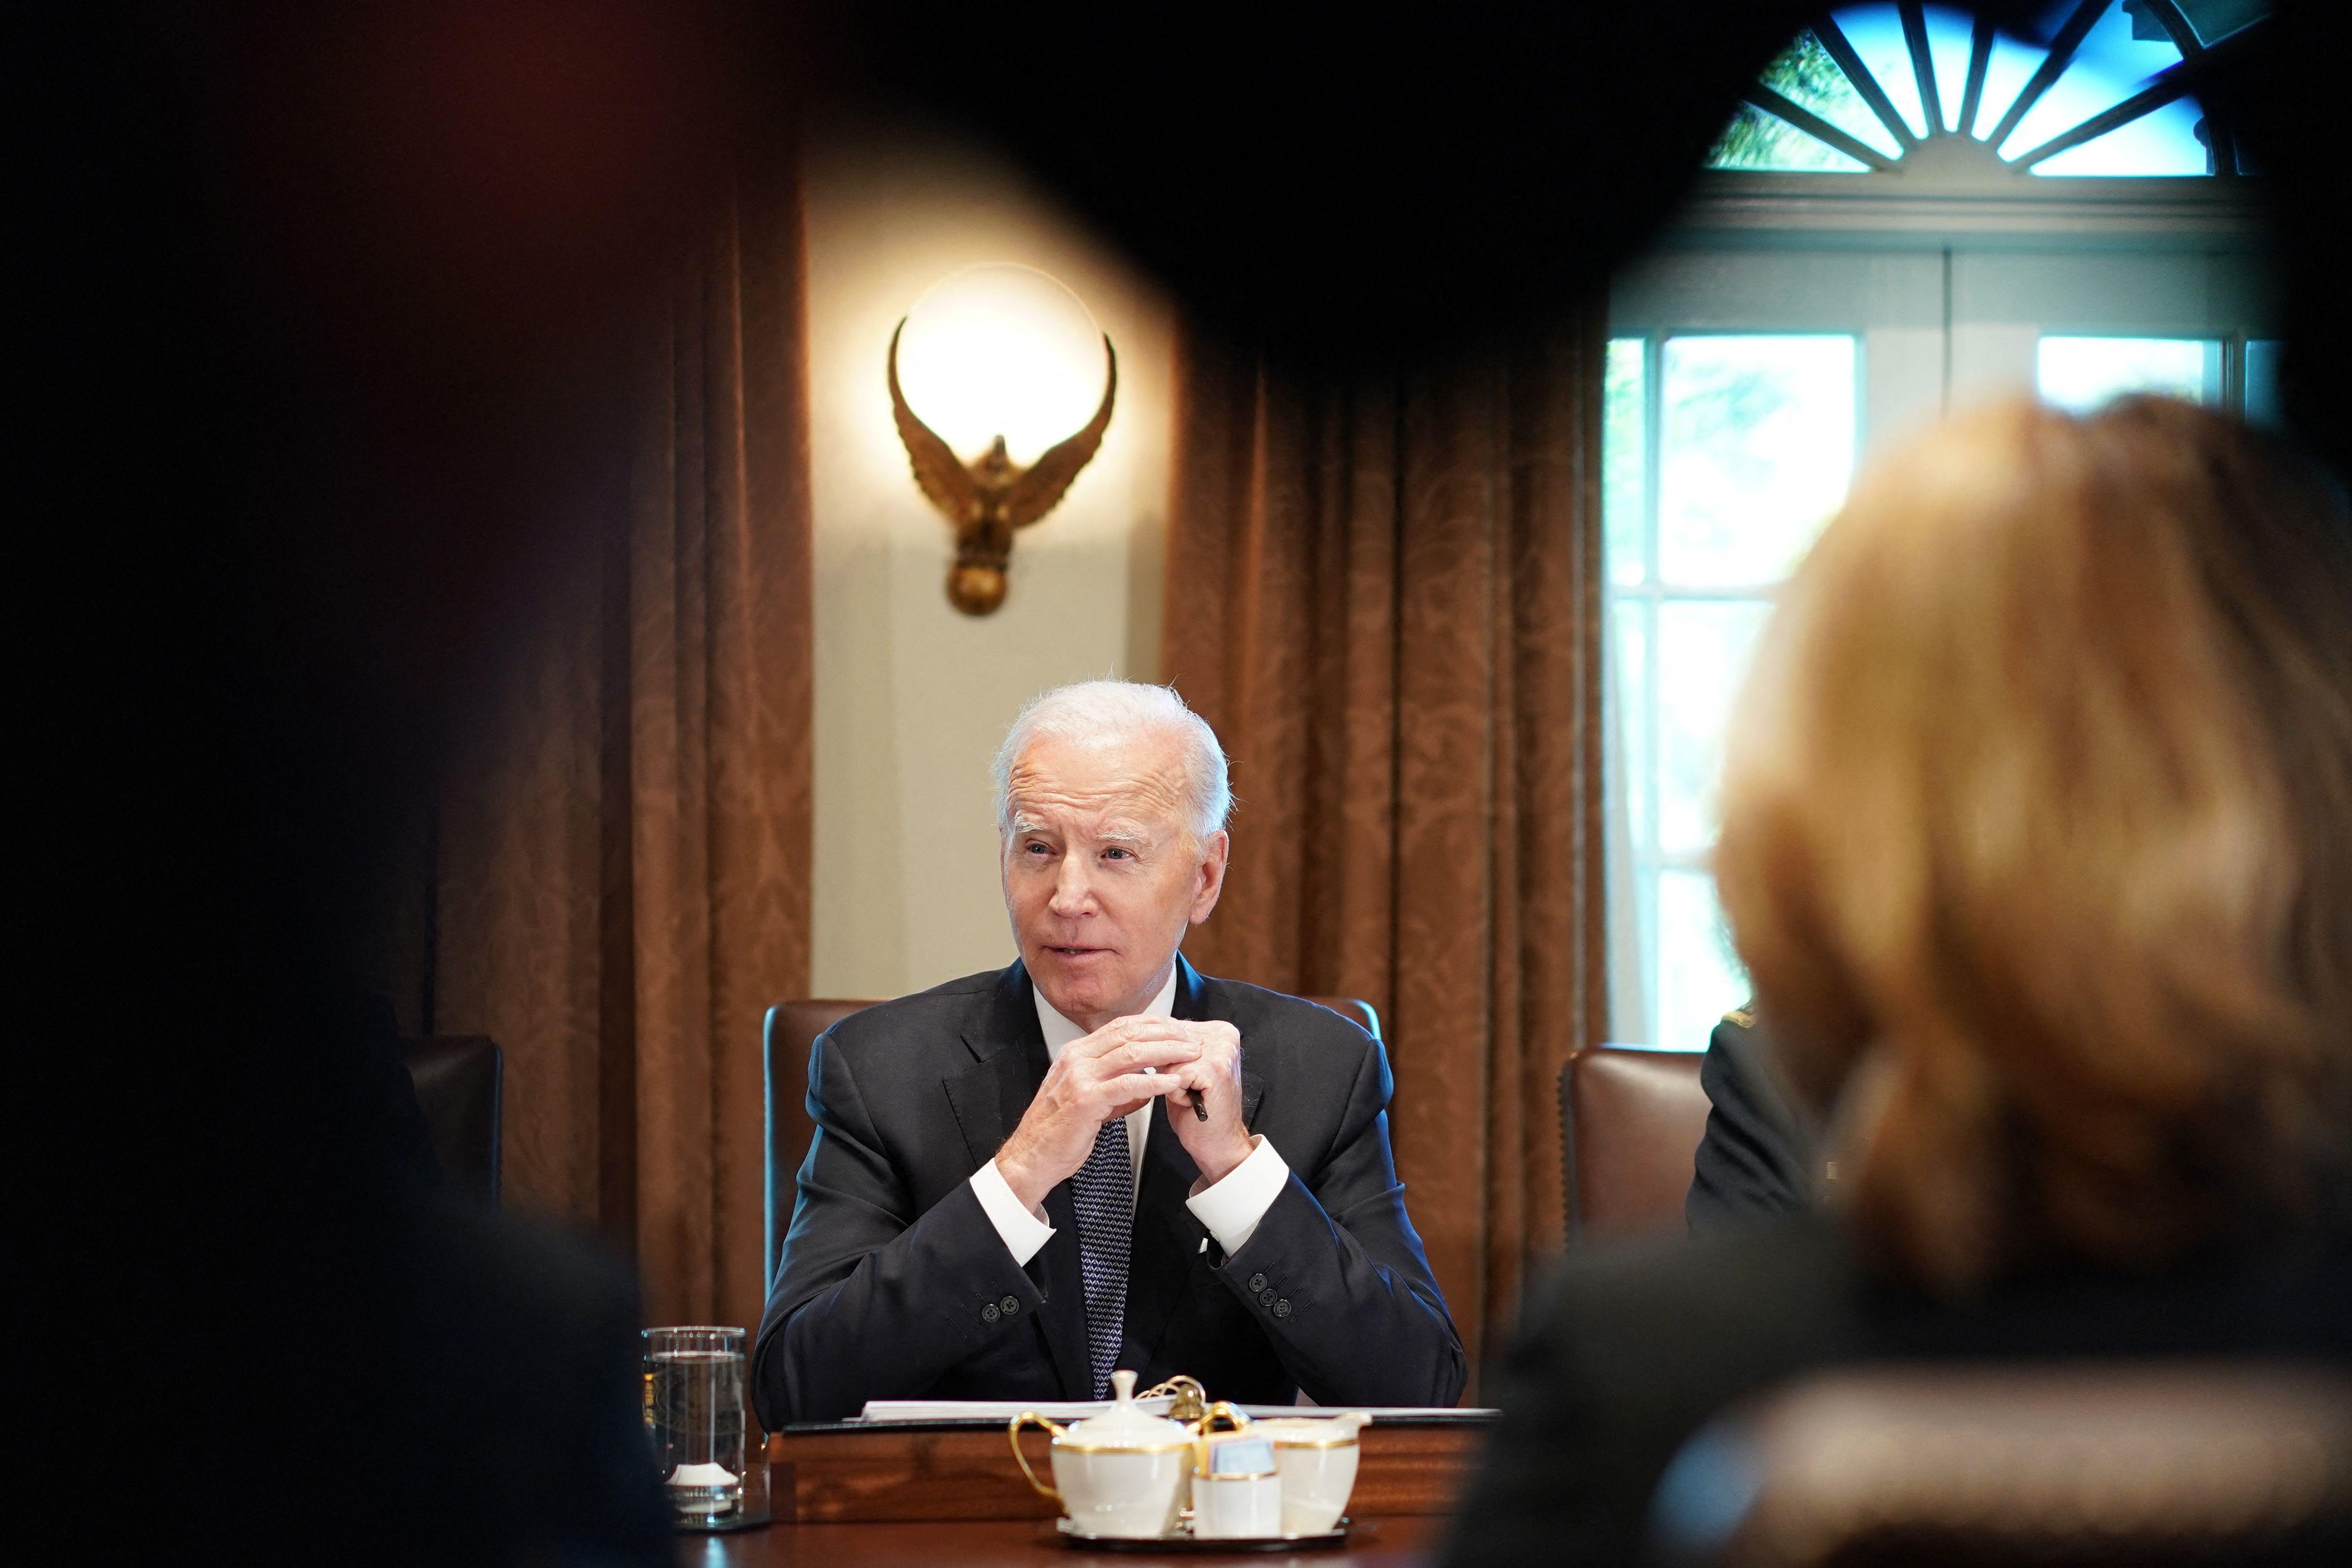 A photo of President Joe Biden that is framed by shadows, and a lamp above him.